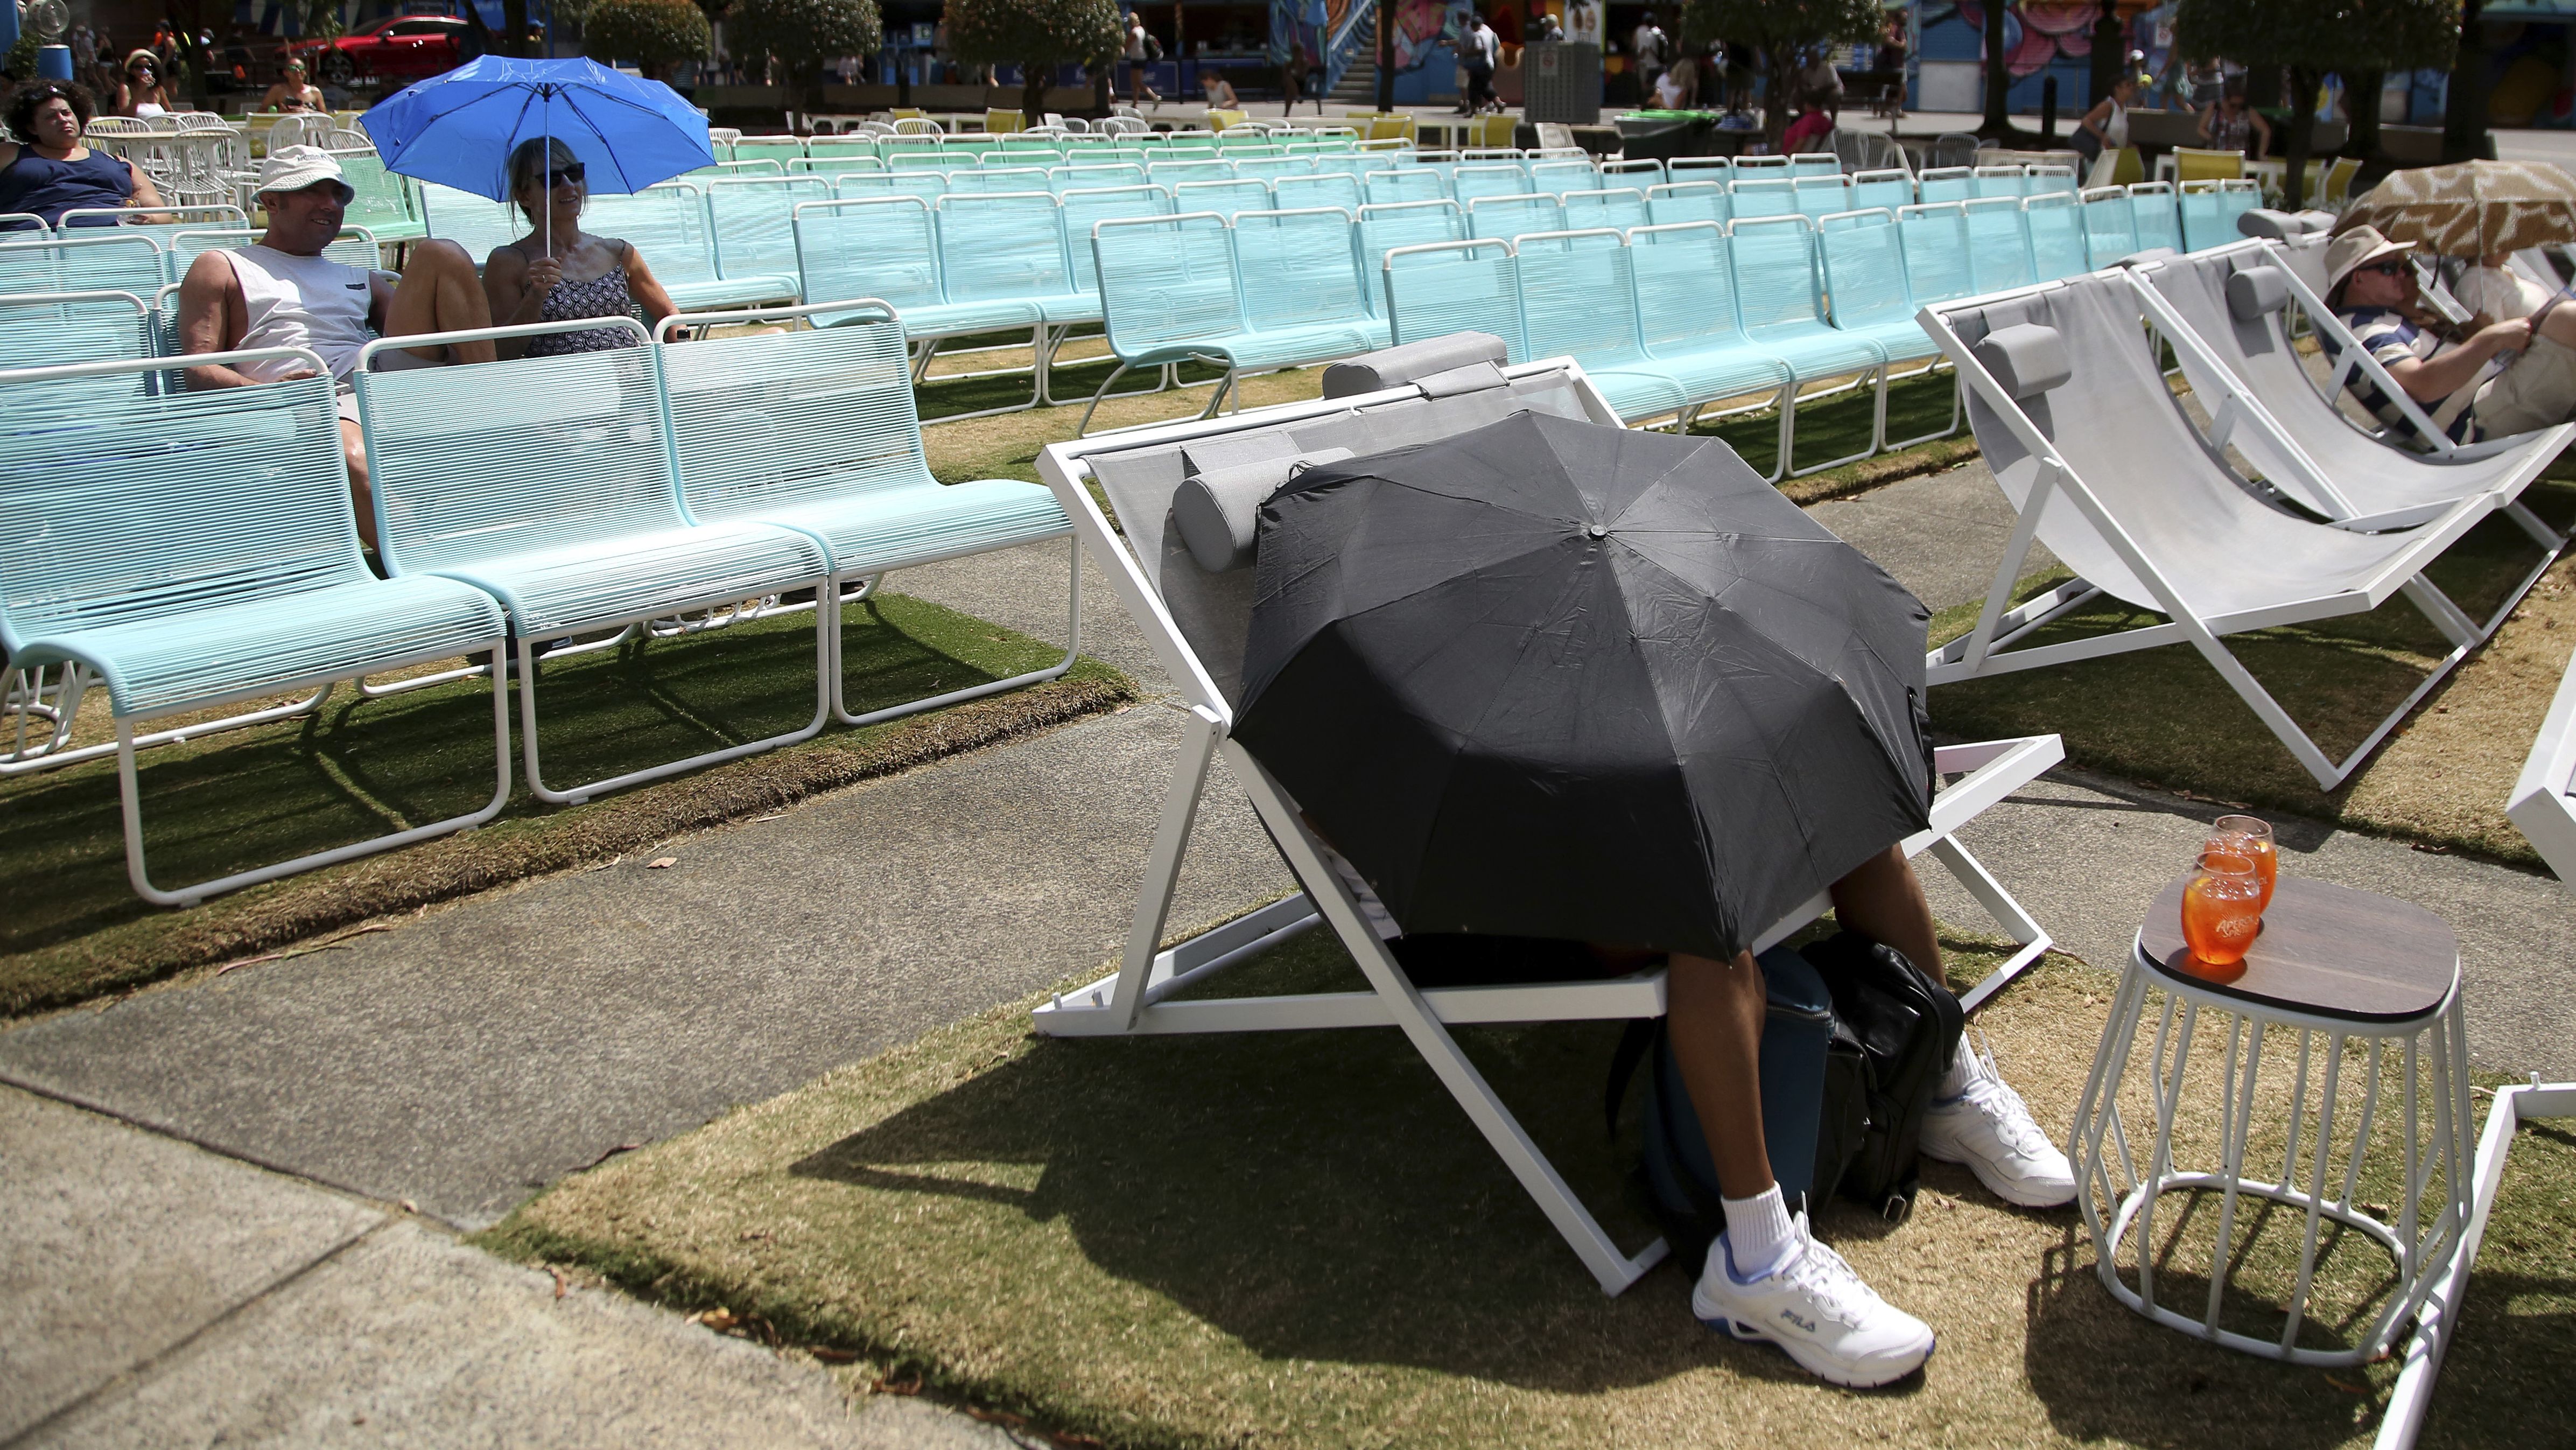 This tennis fan blocked the sun with an umbrella while watching the Australian Open from Garden Square on Friday, January 25.